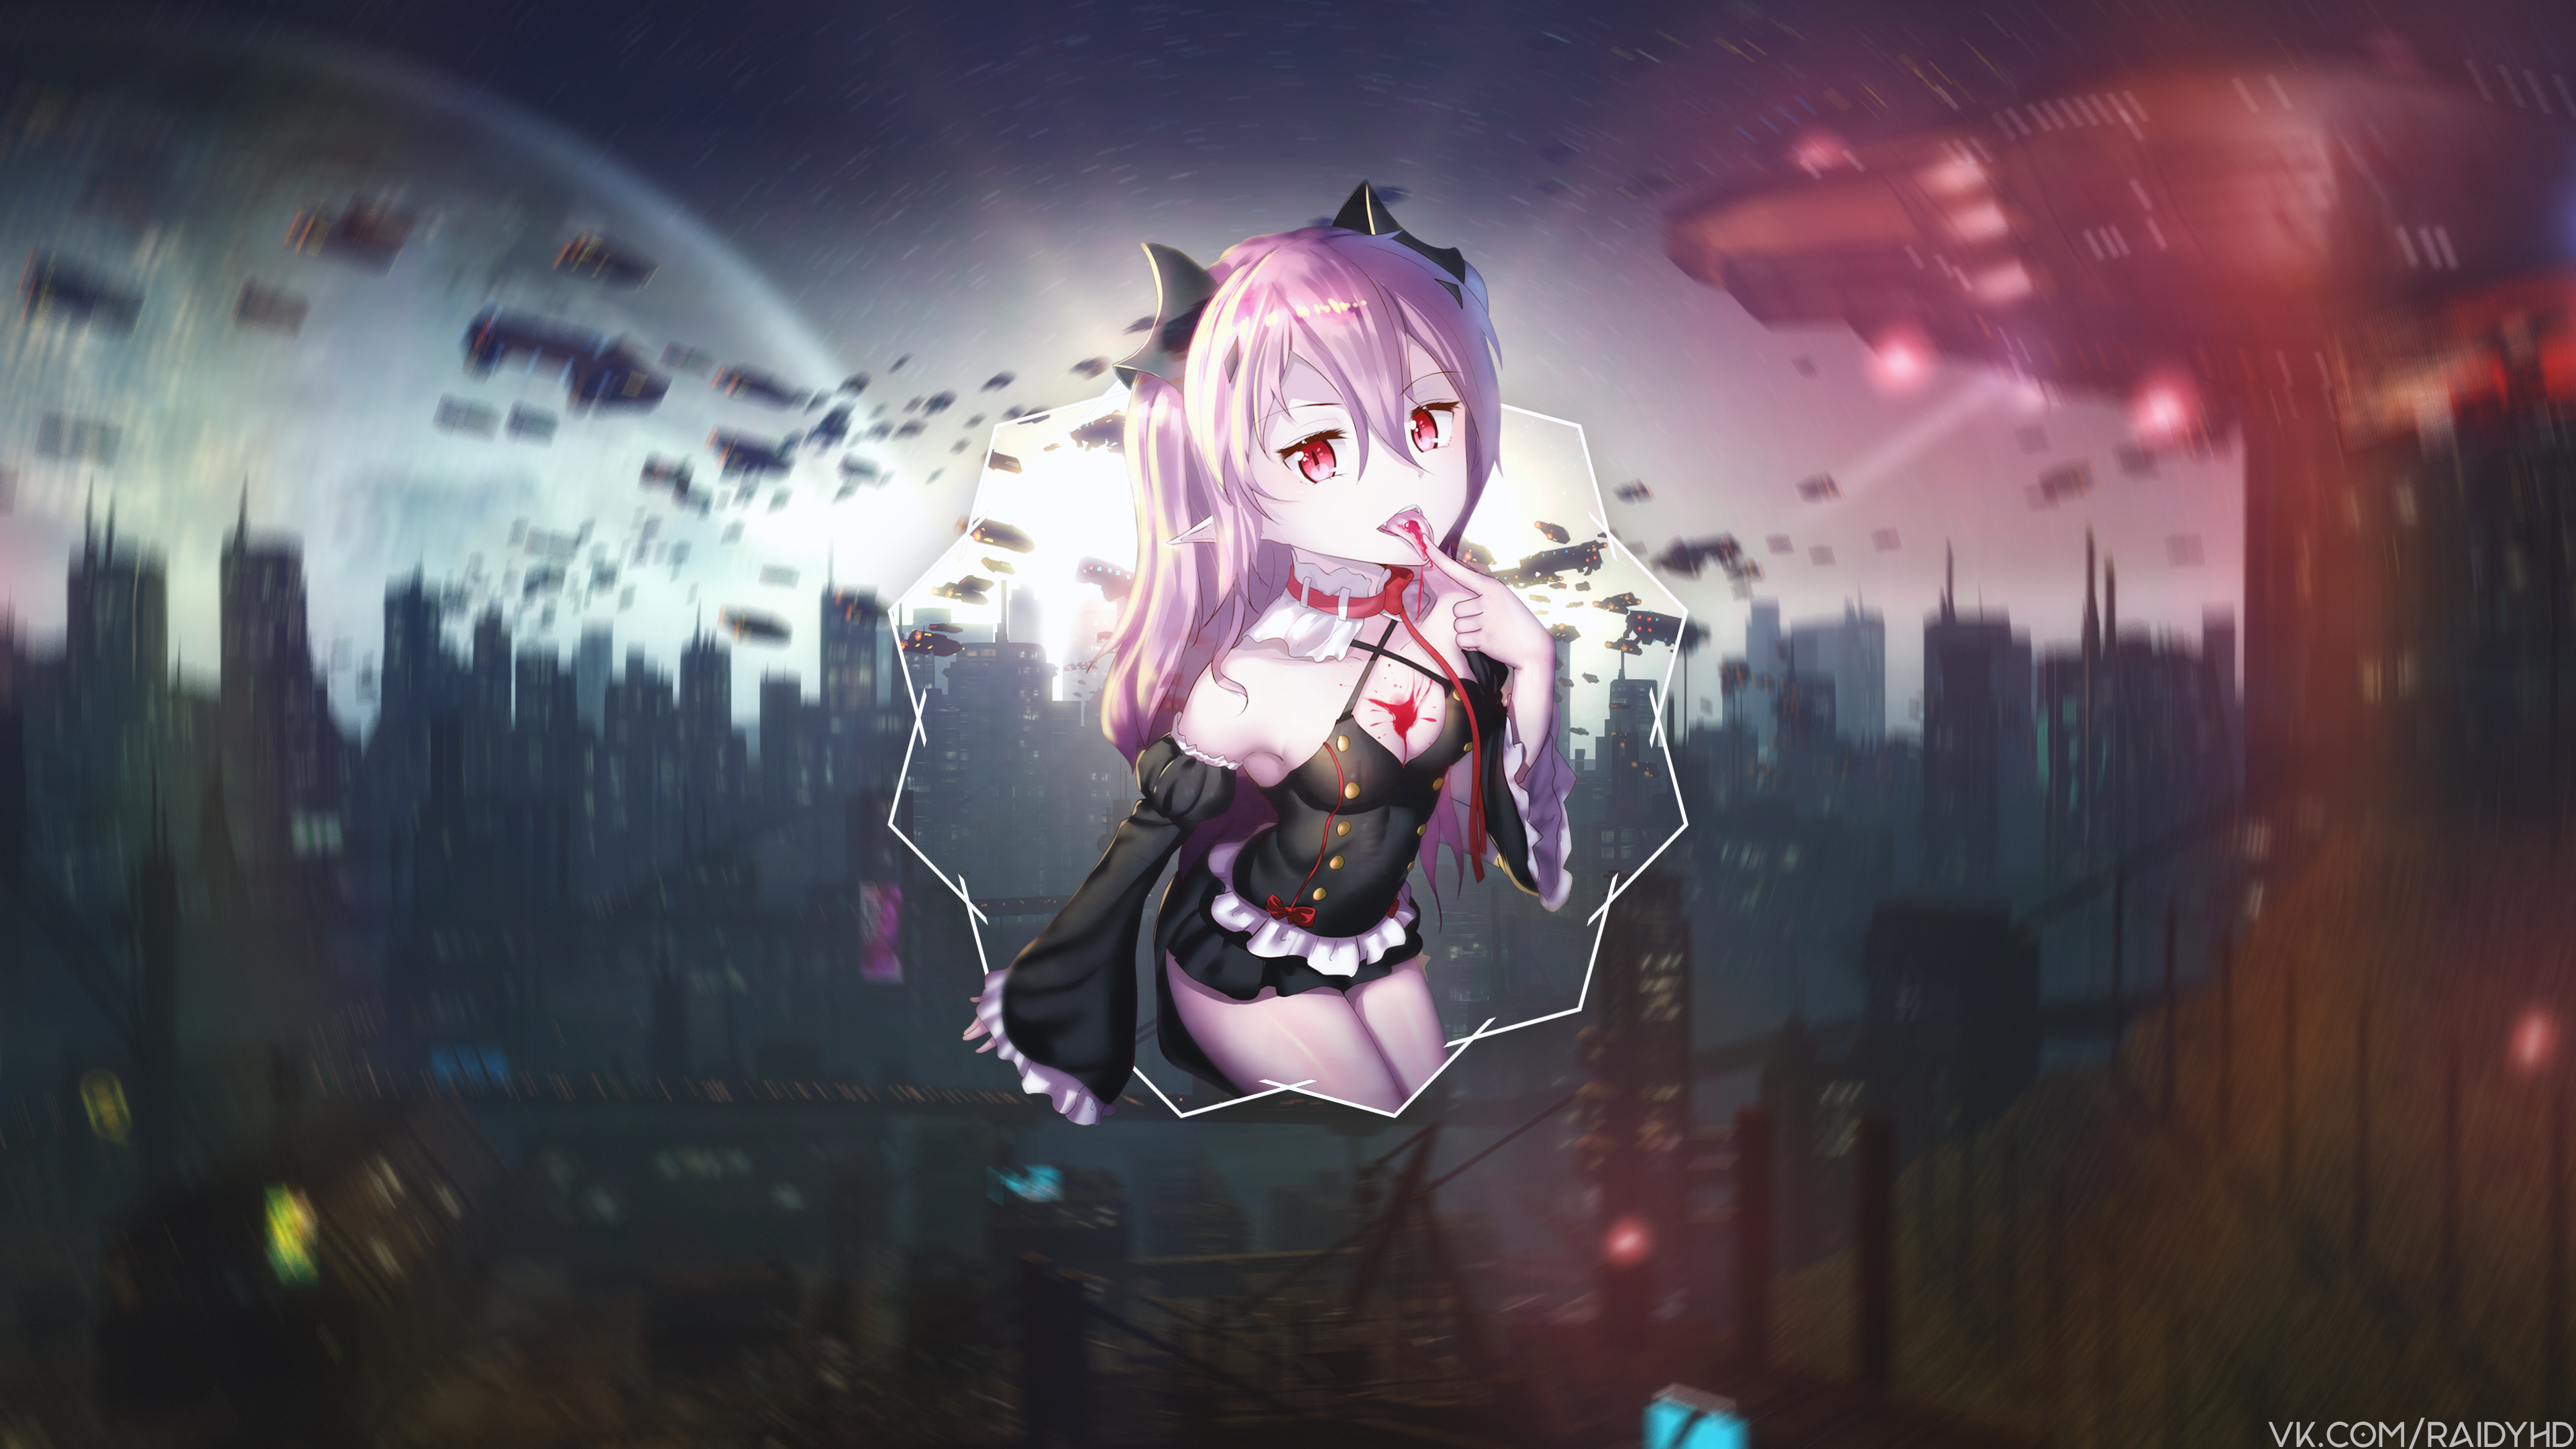 Anime 3840x2160 anime girls anime picture-in-picture Krul Tepes Owari No Seraph watermarked